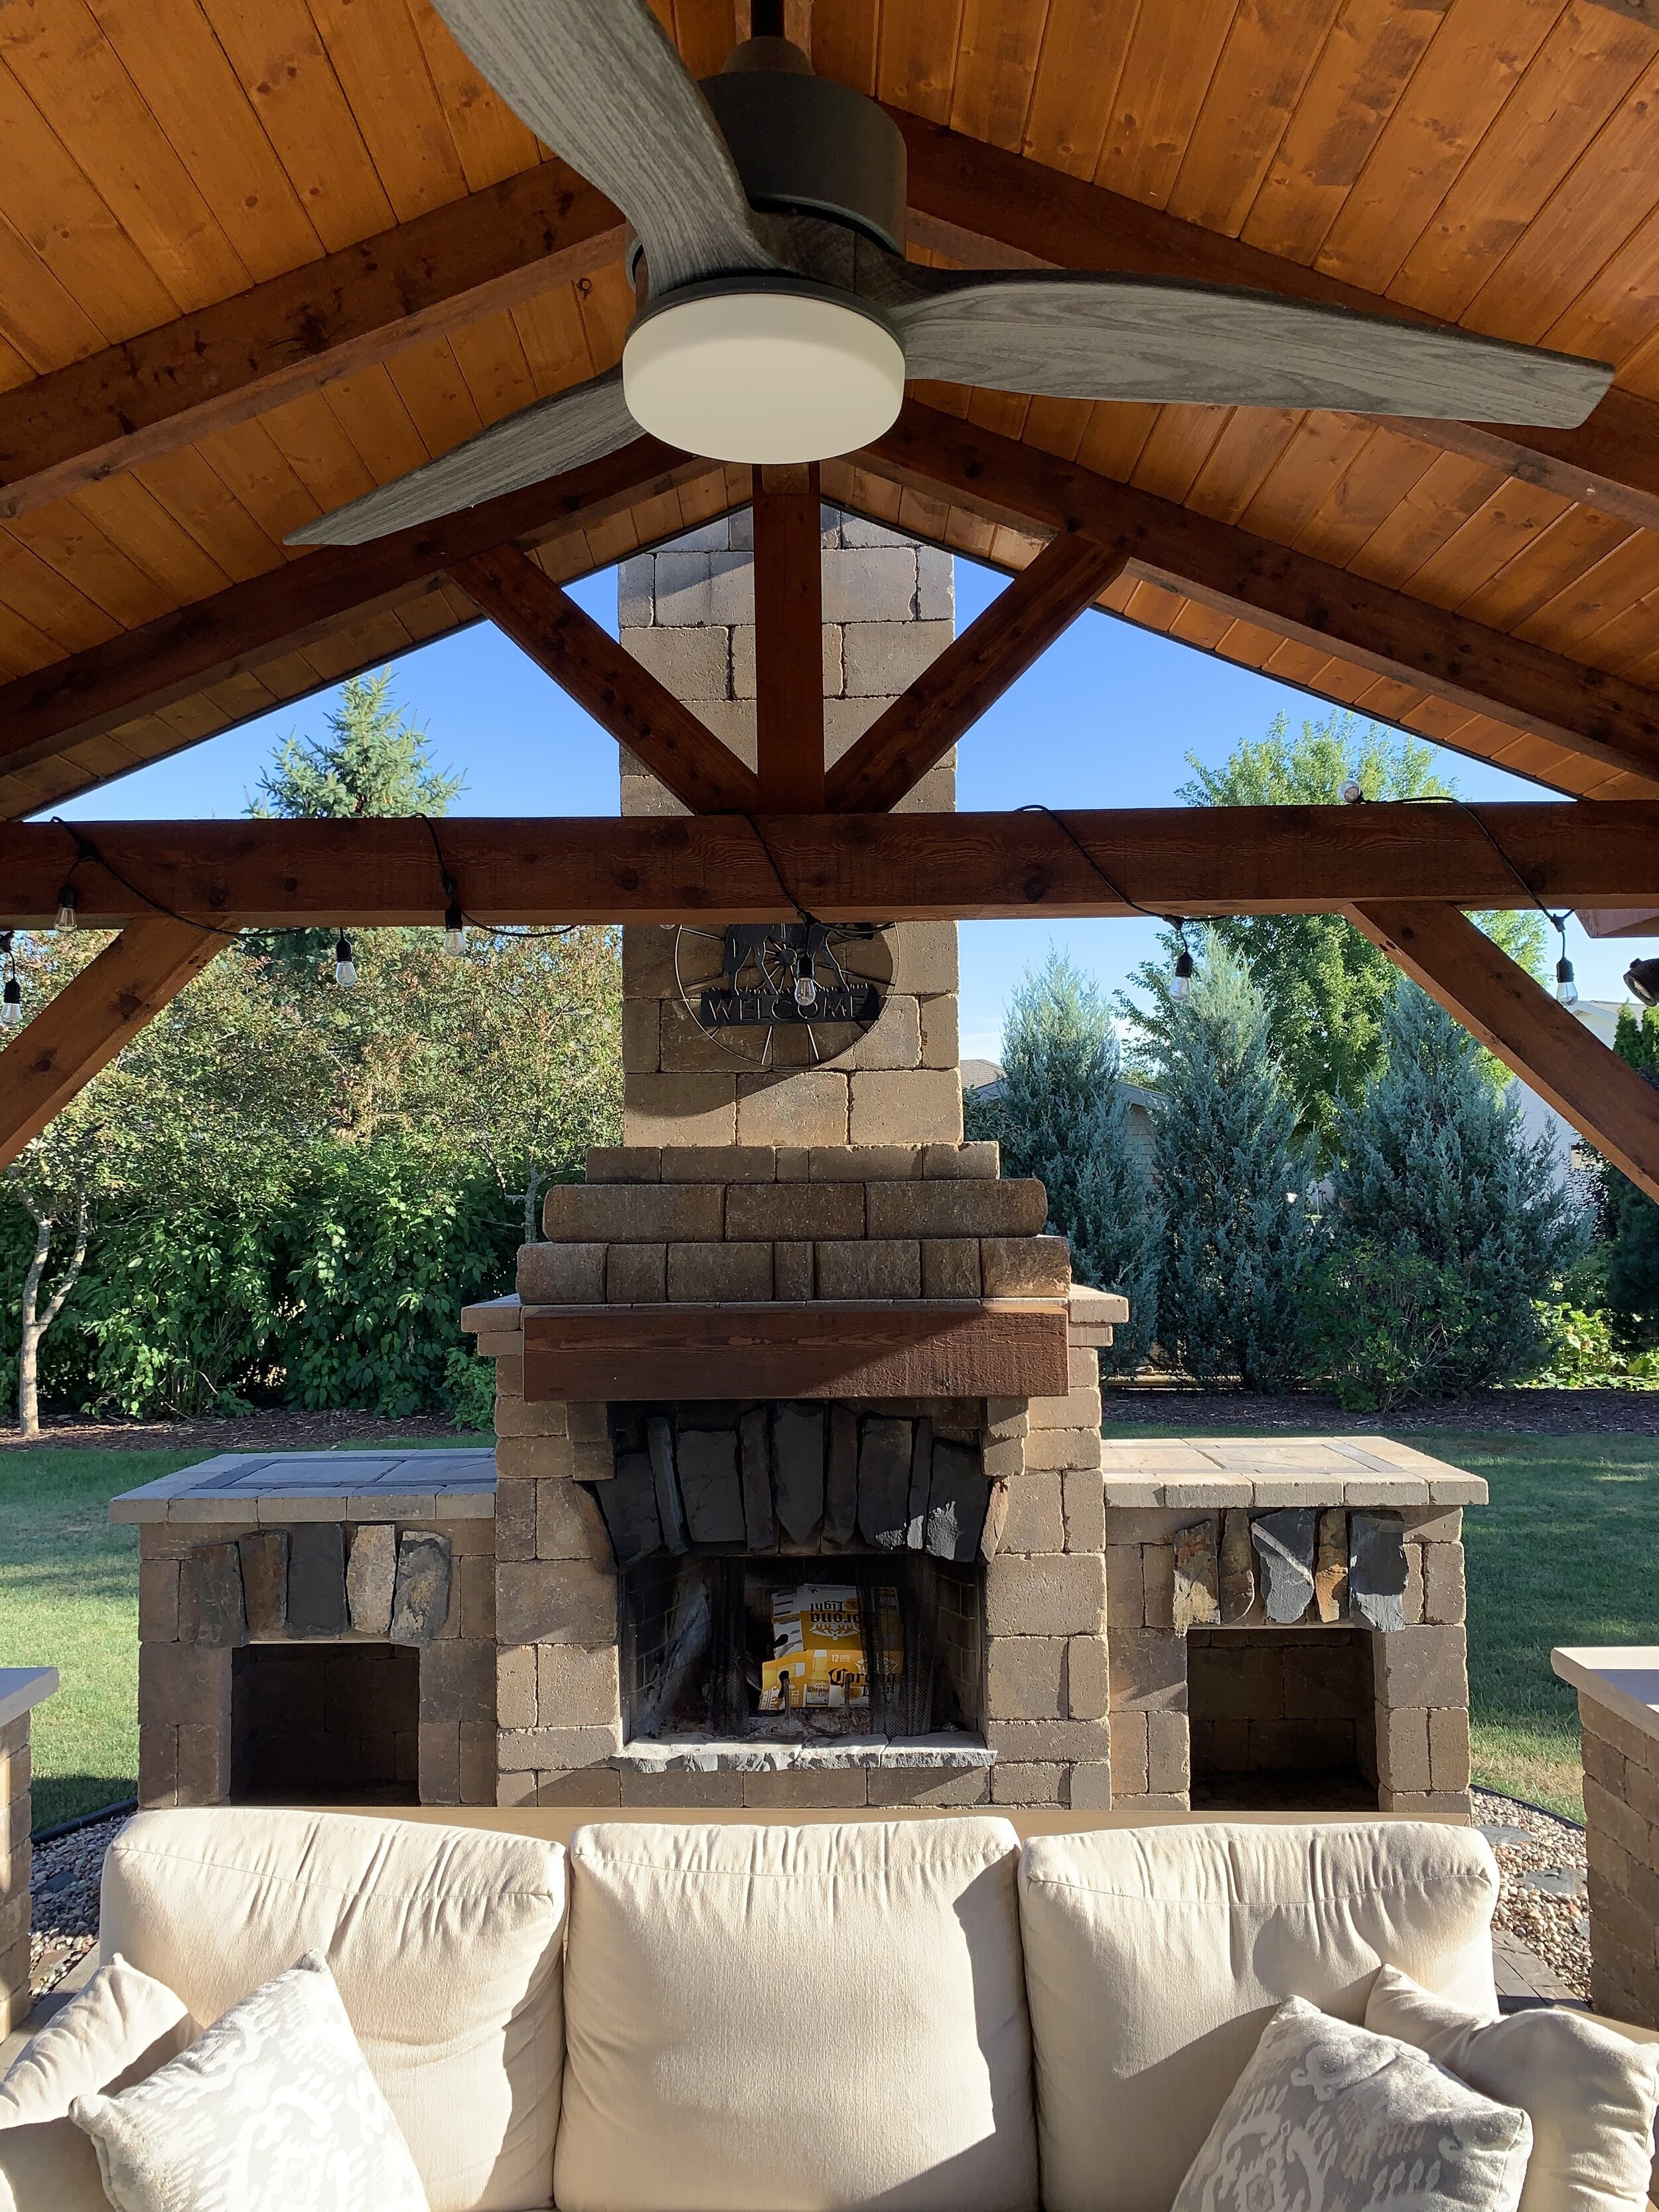 Vosters Landscaping | Appleton, Fox Valley, Green Bay, WI | Outdoor Living